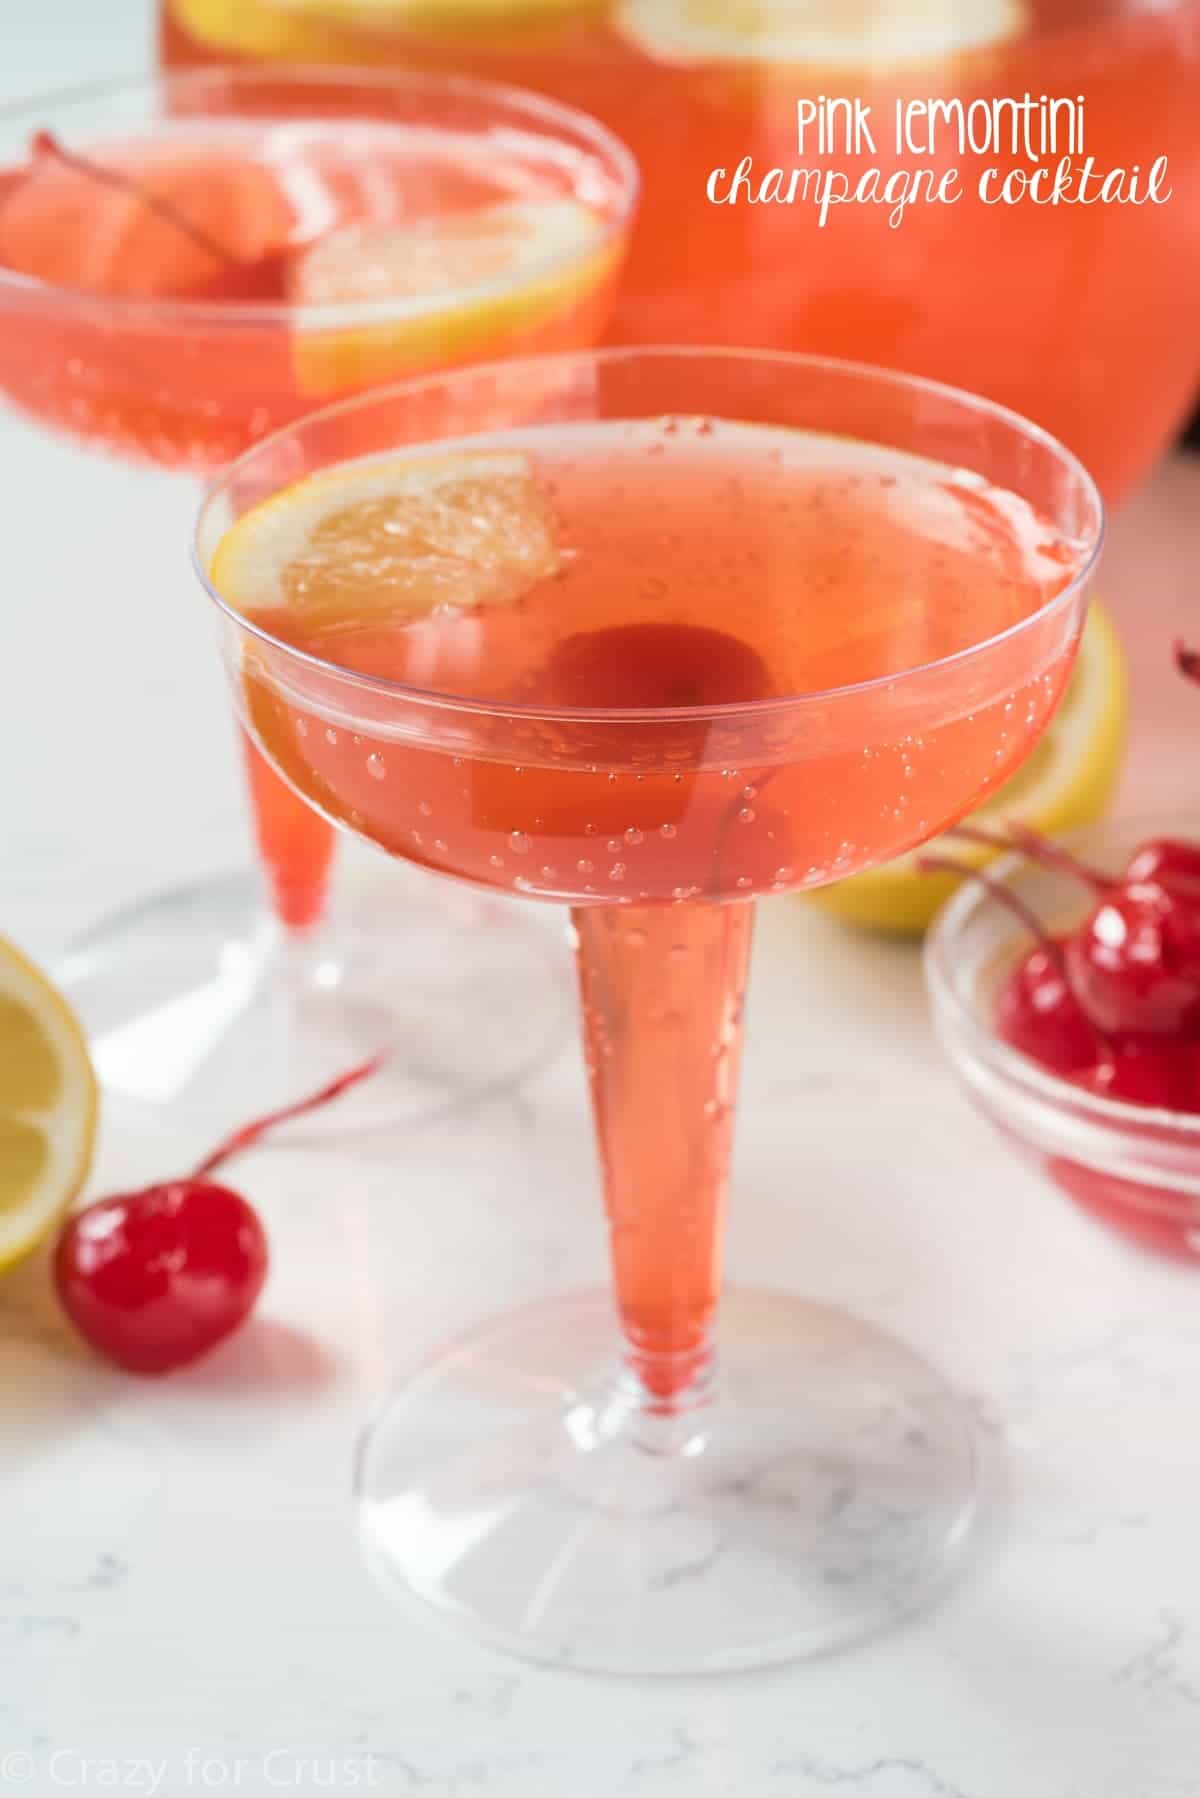 Pink Champagne Cocktail